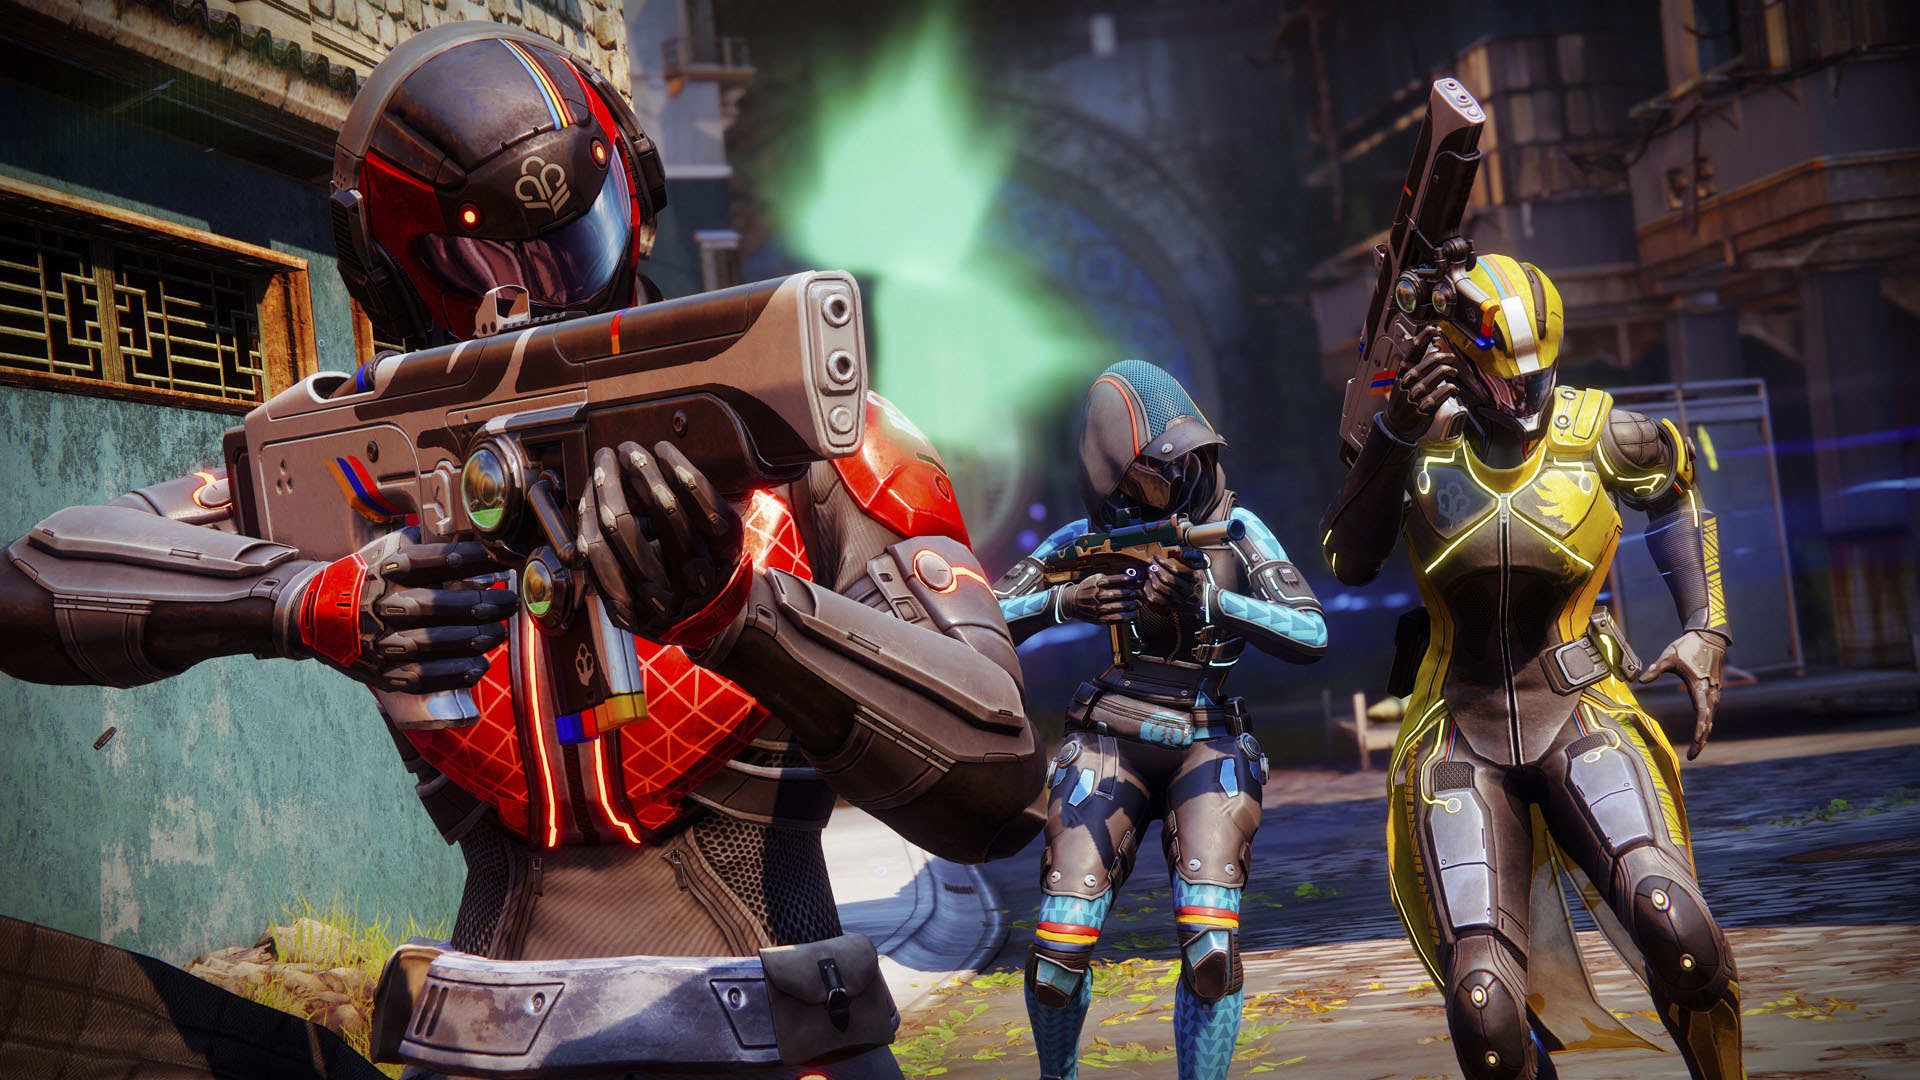 Destiny 2 Players Can Level Up Crafted Weapons Faster With New Guardian Games Buff